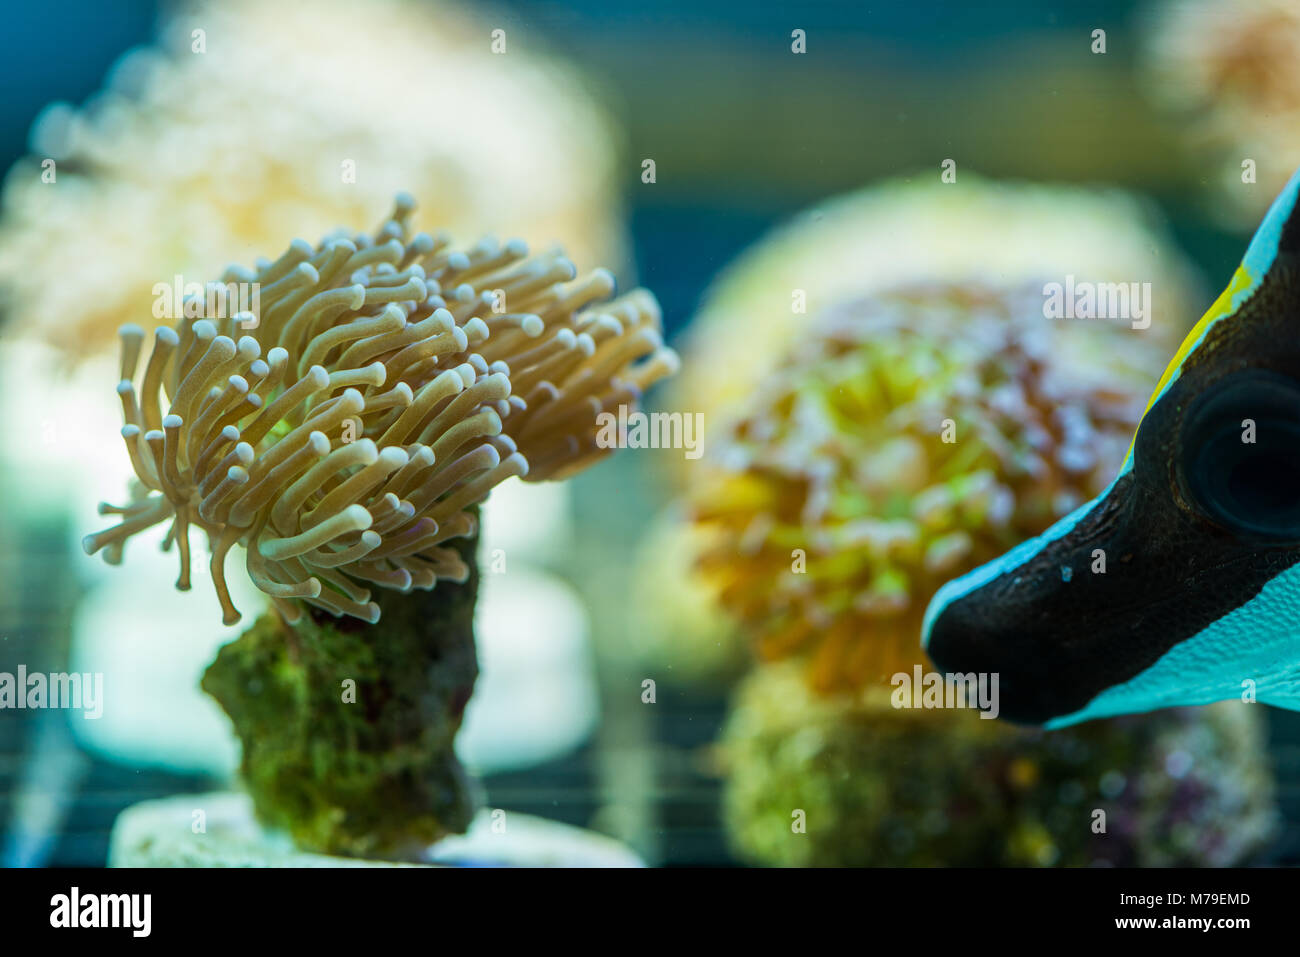 Details of some corals and fish in a marine aquarium Stock Photo